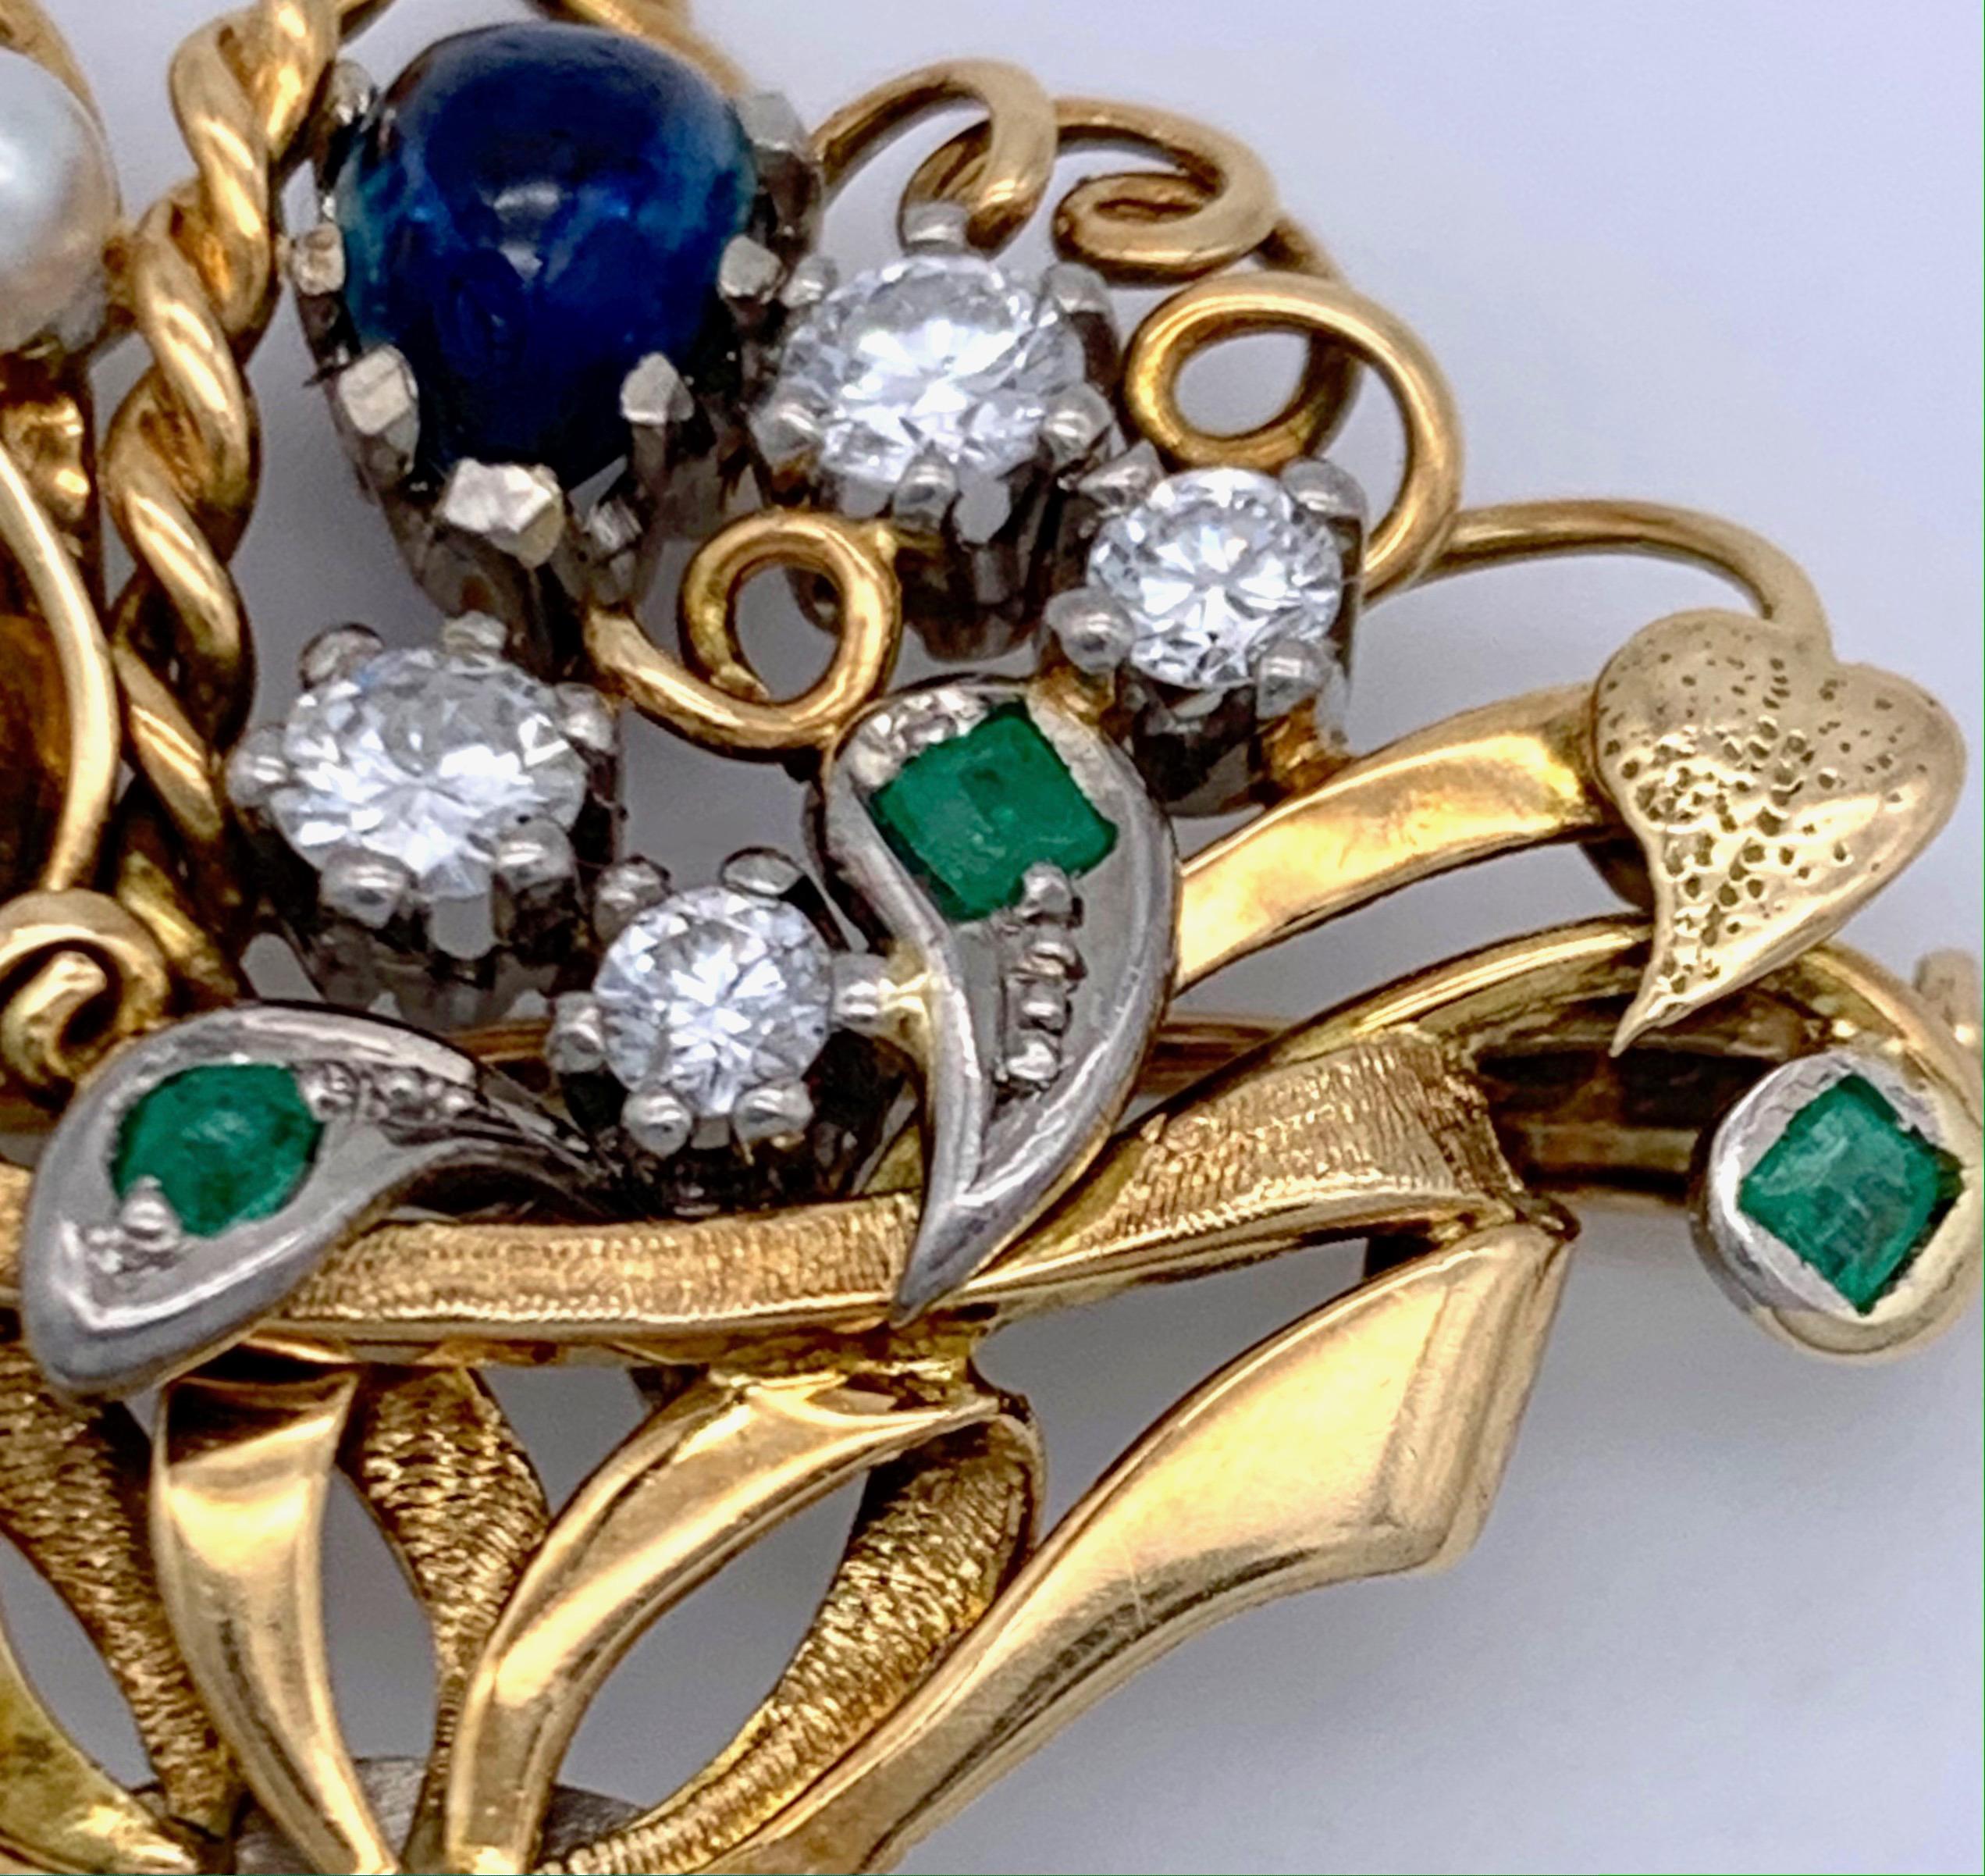 This charming little flower basket is filled with flowers set with 7 diamonds ranging from 0.05 to 0.20 ct. One flower is set with a heart shaped sapphire cabochon, three leaves are set with emeralds. The basket is partially engraved, the handle is